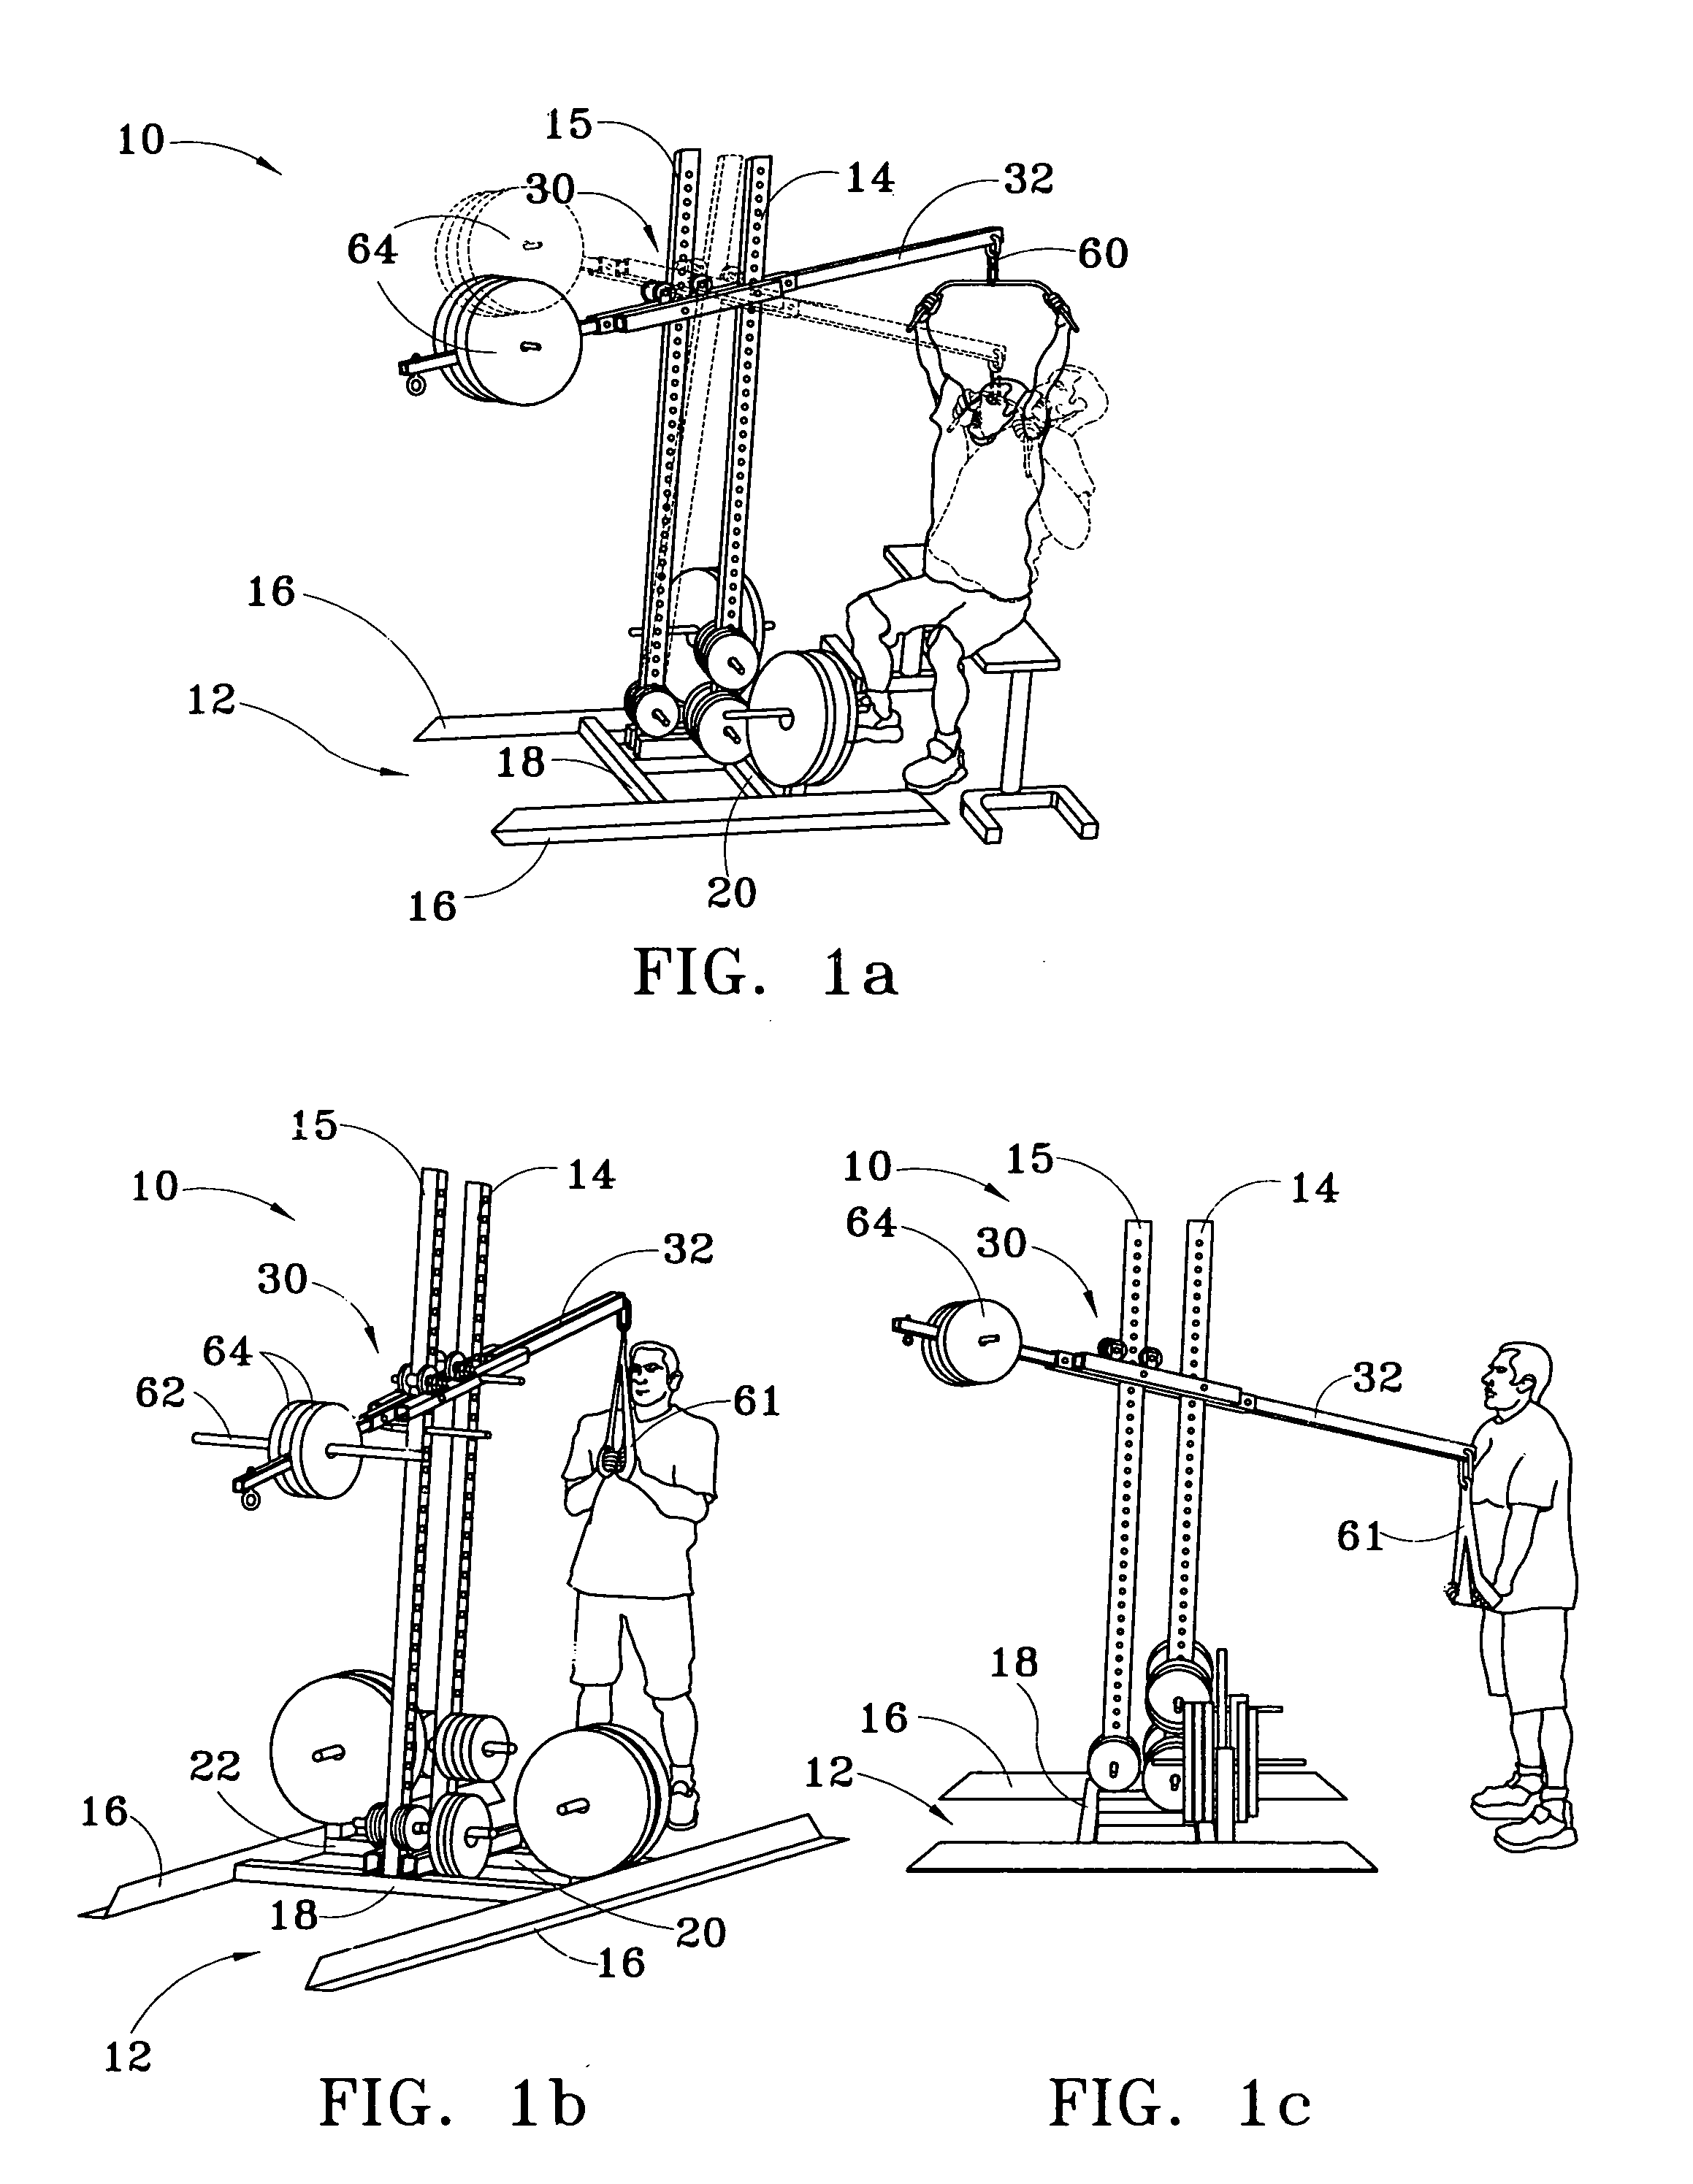 Weight exercise device